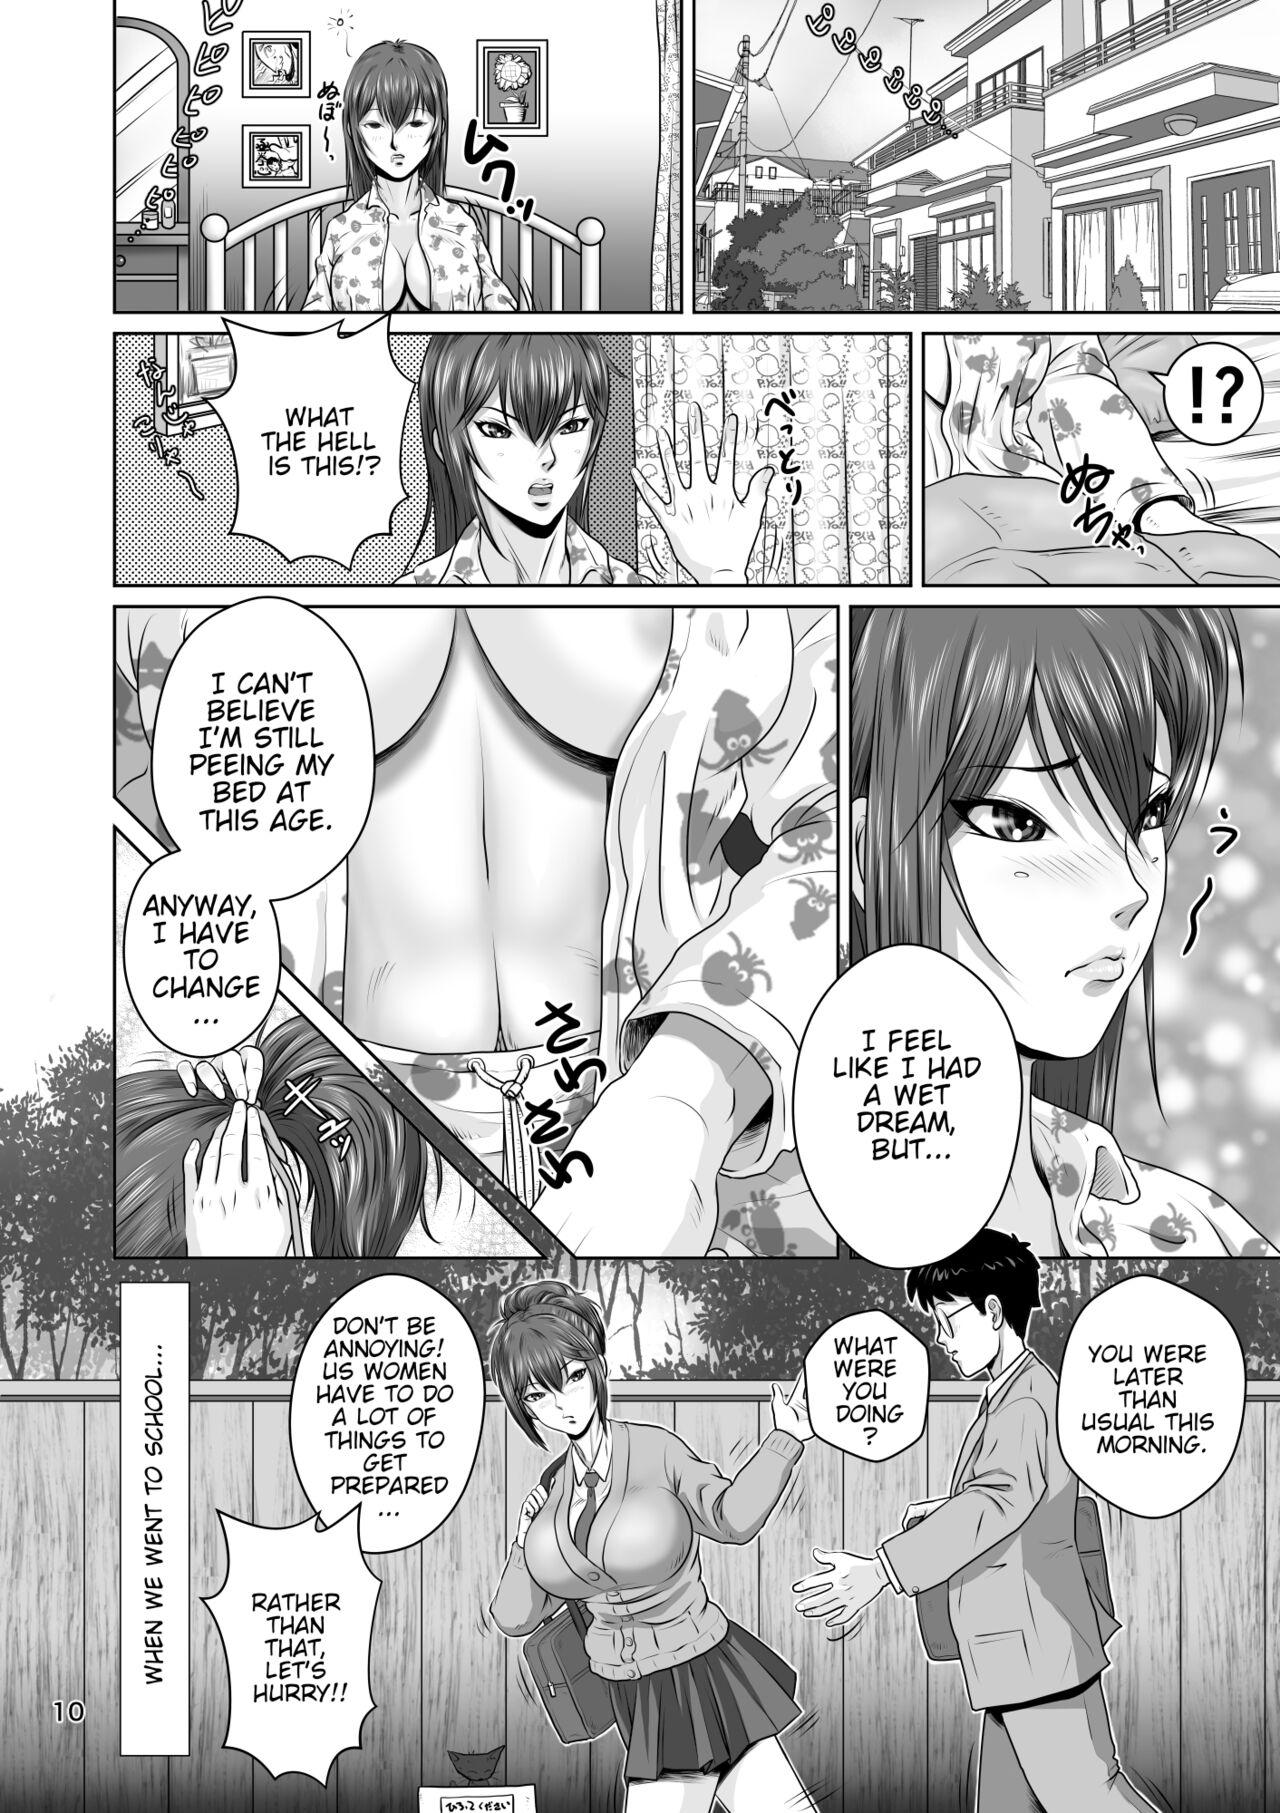 Best Blowjobs Ever [NTR System] Cuckold Childhood Friend, Haruka-Chans Crisis In Two-Shots!! Canadian - Page 11